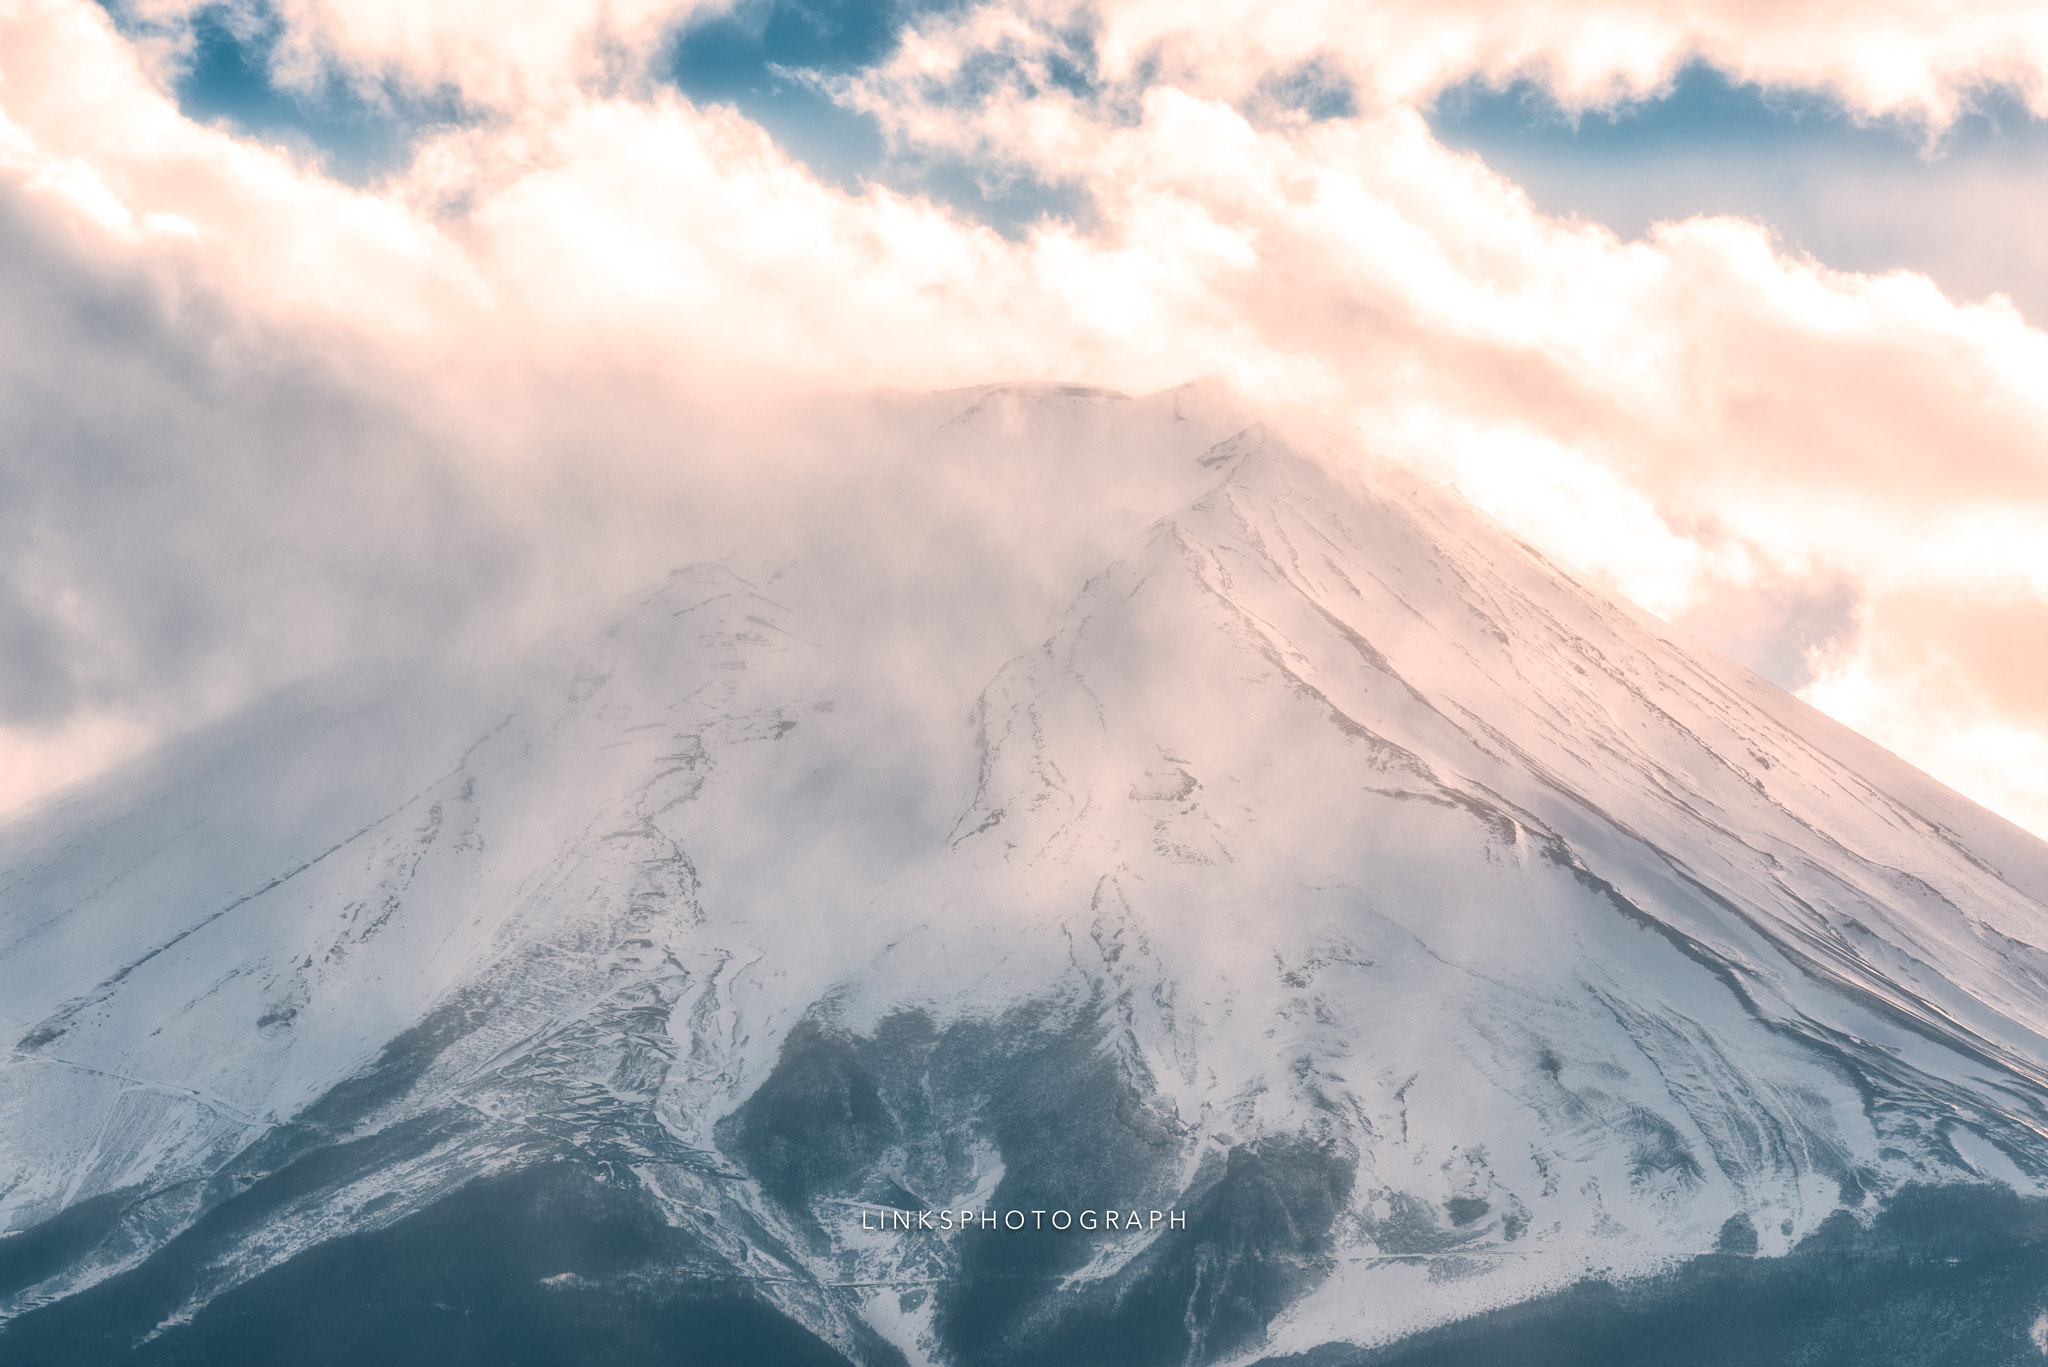 Nikon D810 sample photo. Take a try to guess the mountains' name~ photography